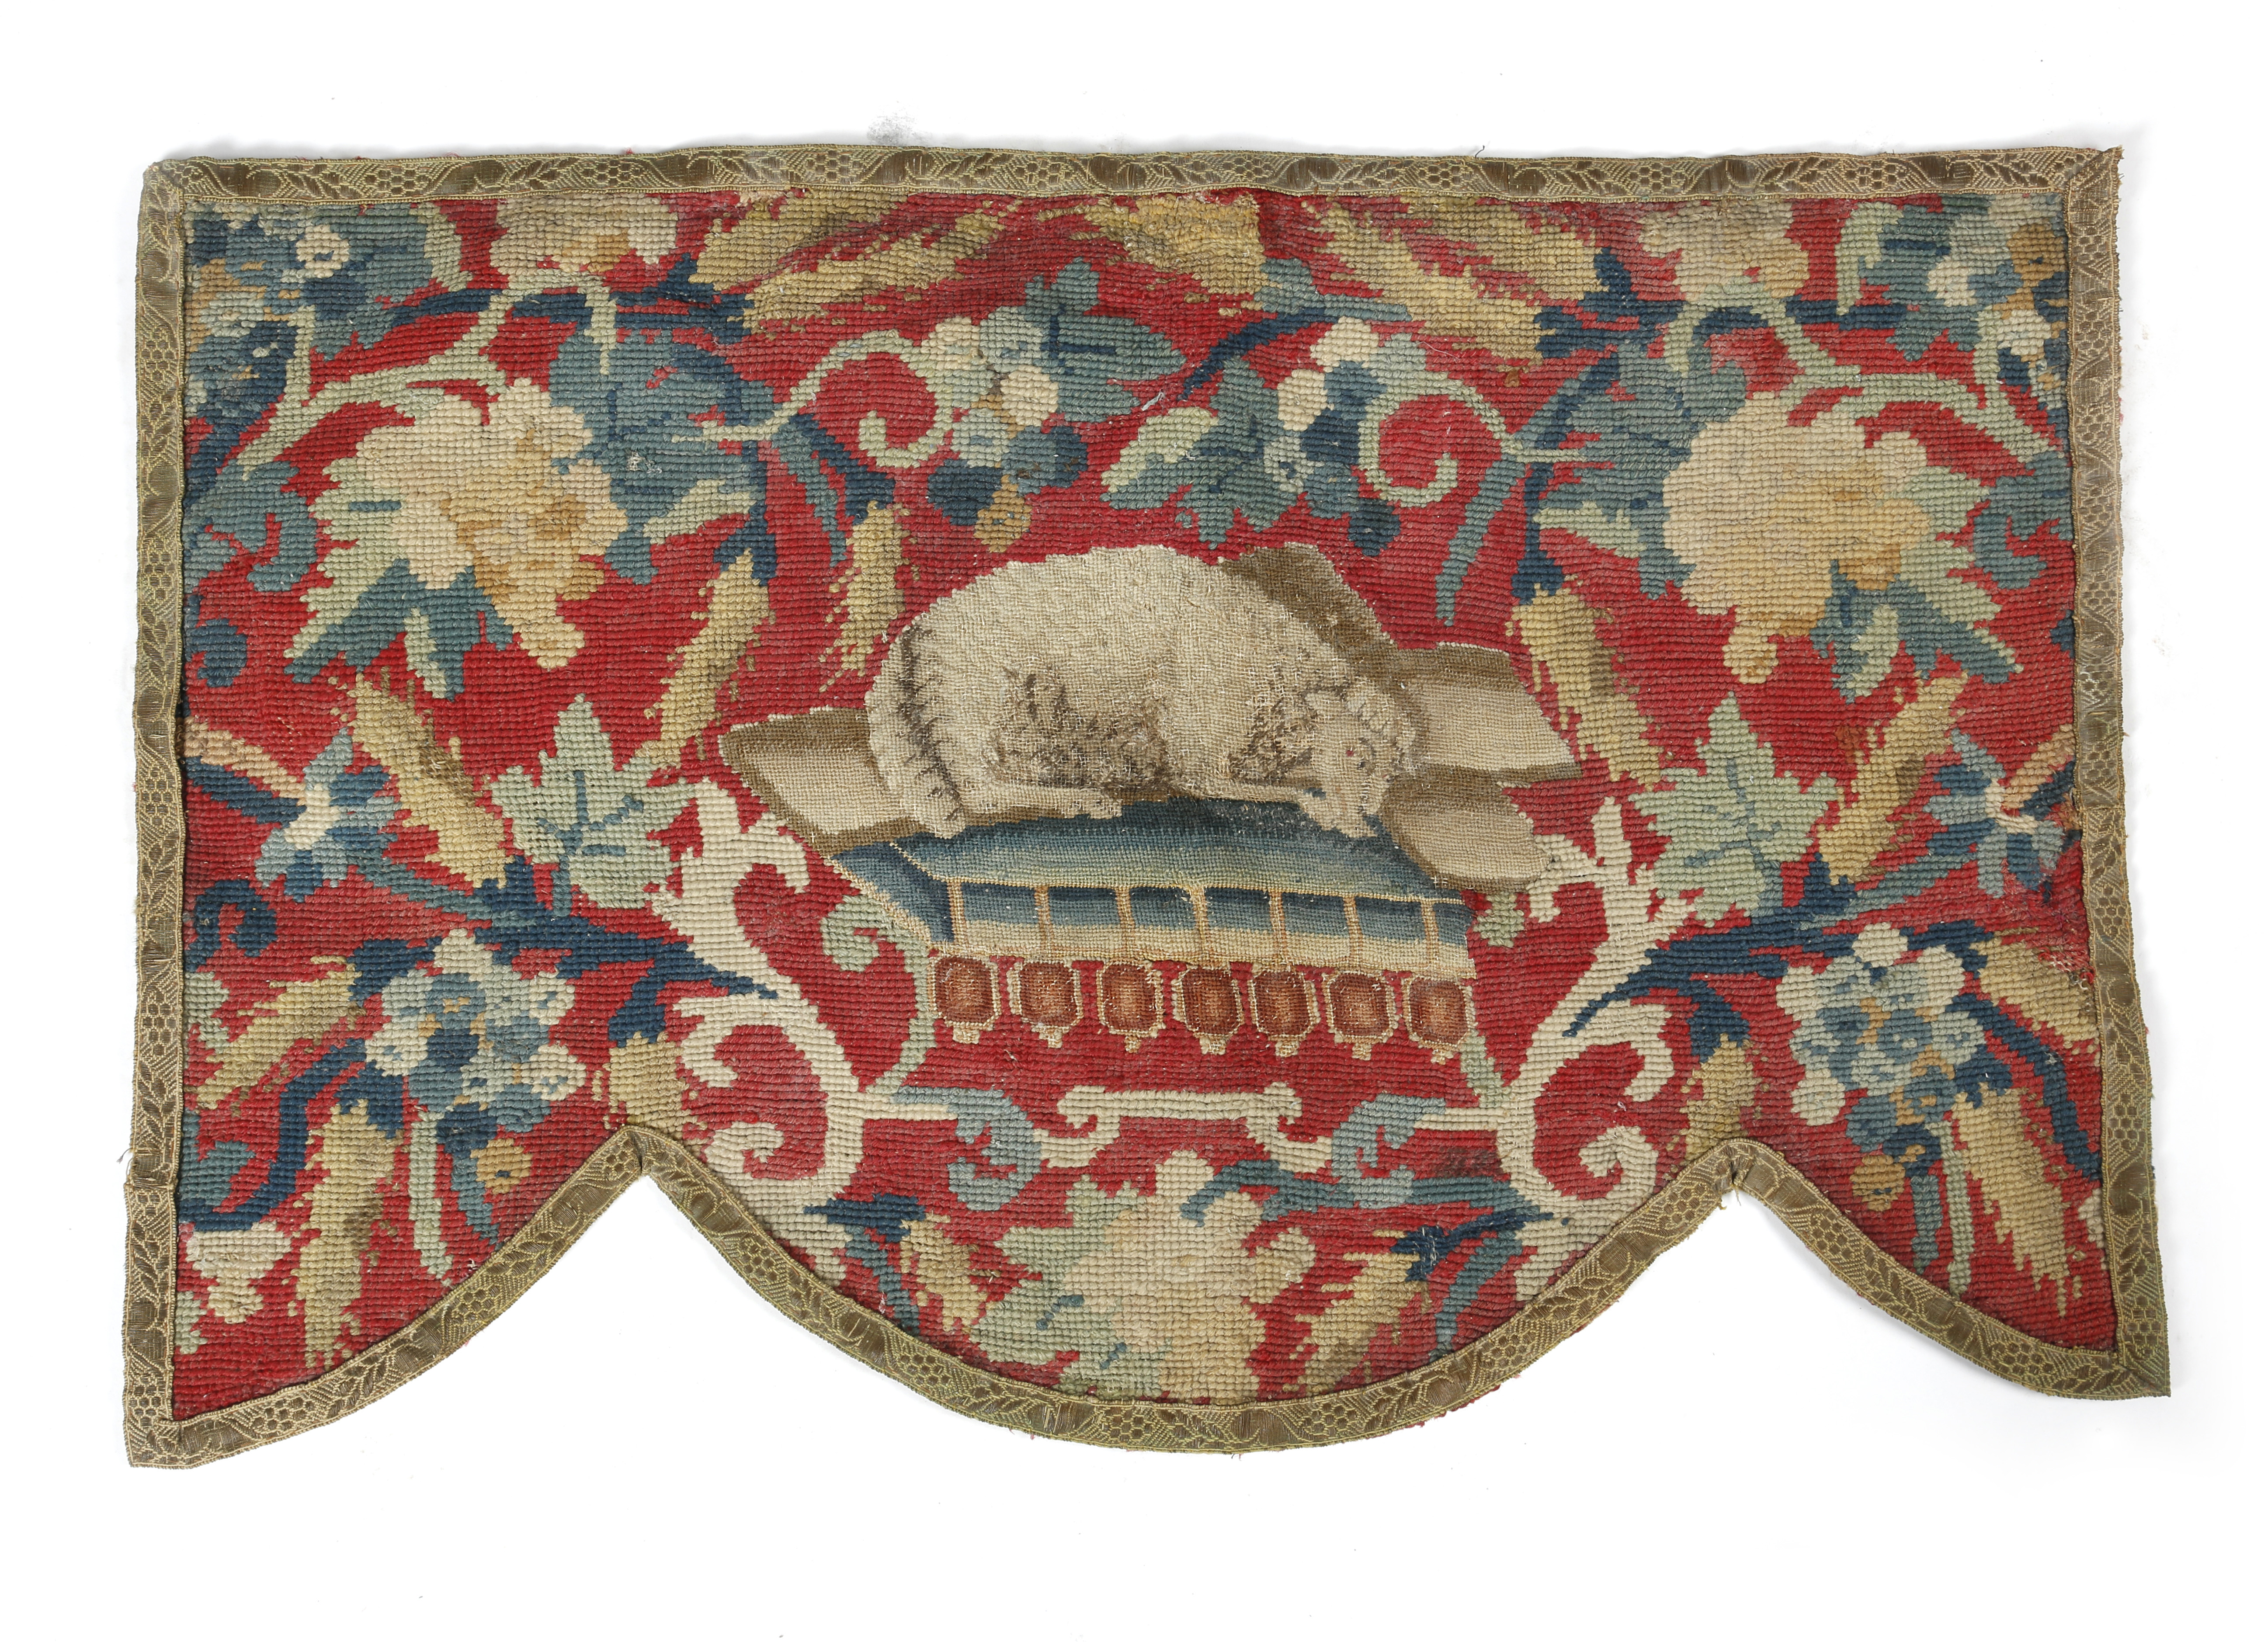 A GEORGE II NEEDLEWORK PANEL C.1740 worked in gros point with a recumbent sheep on a tasselled